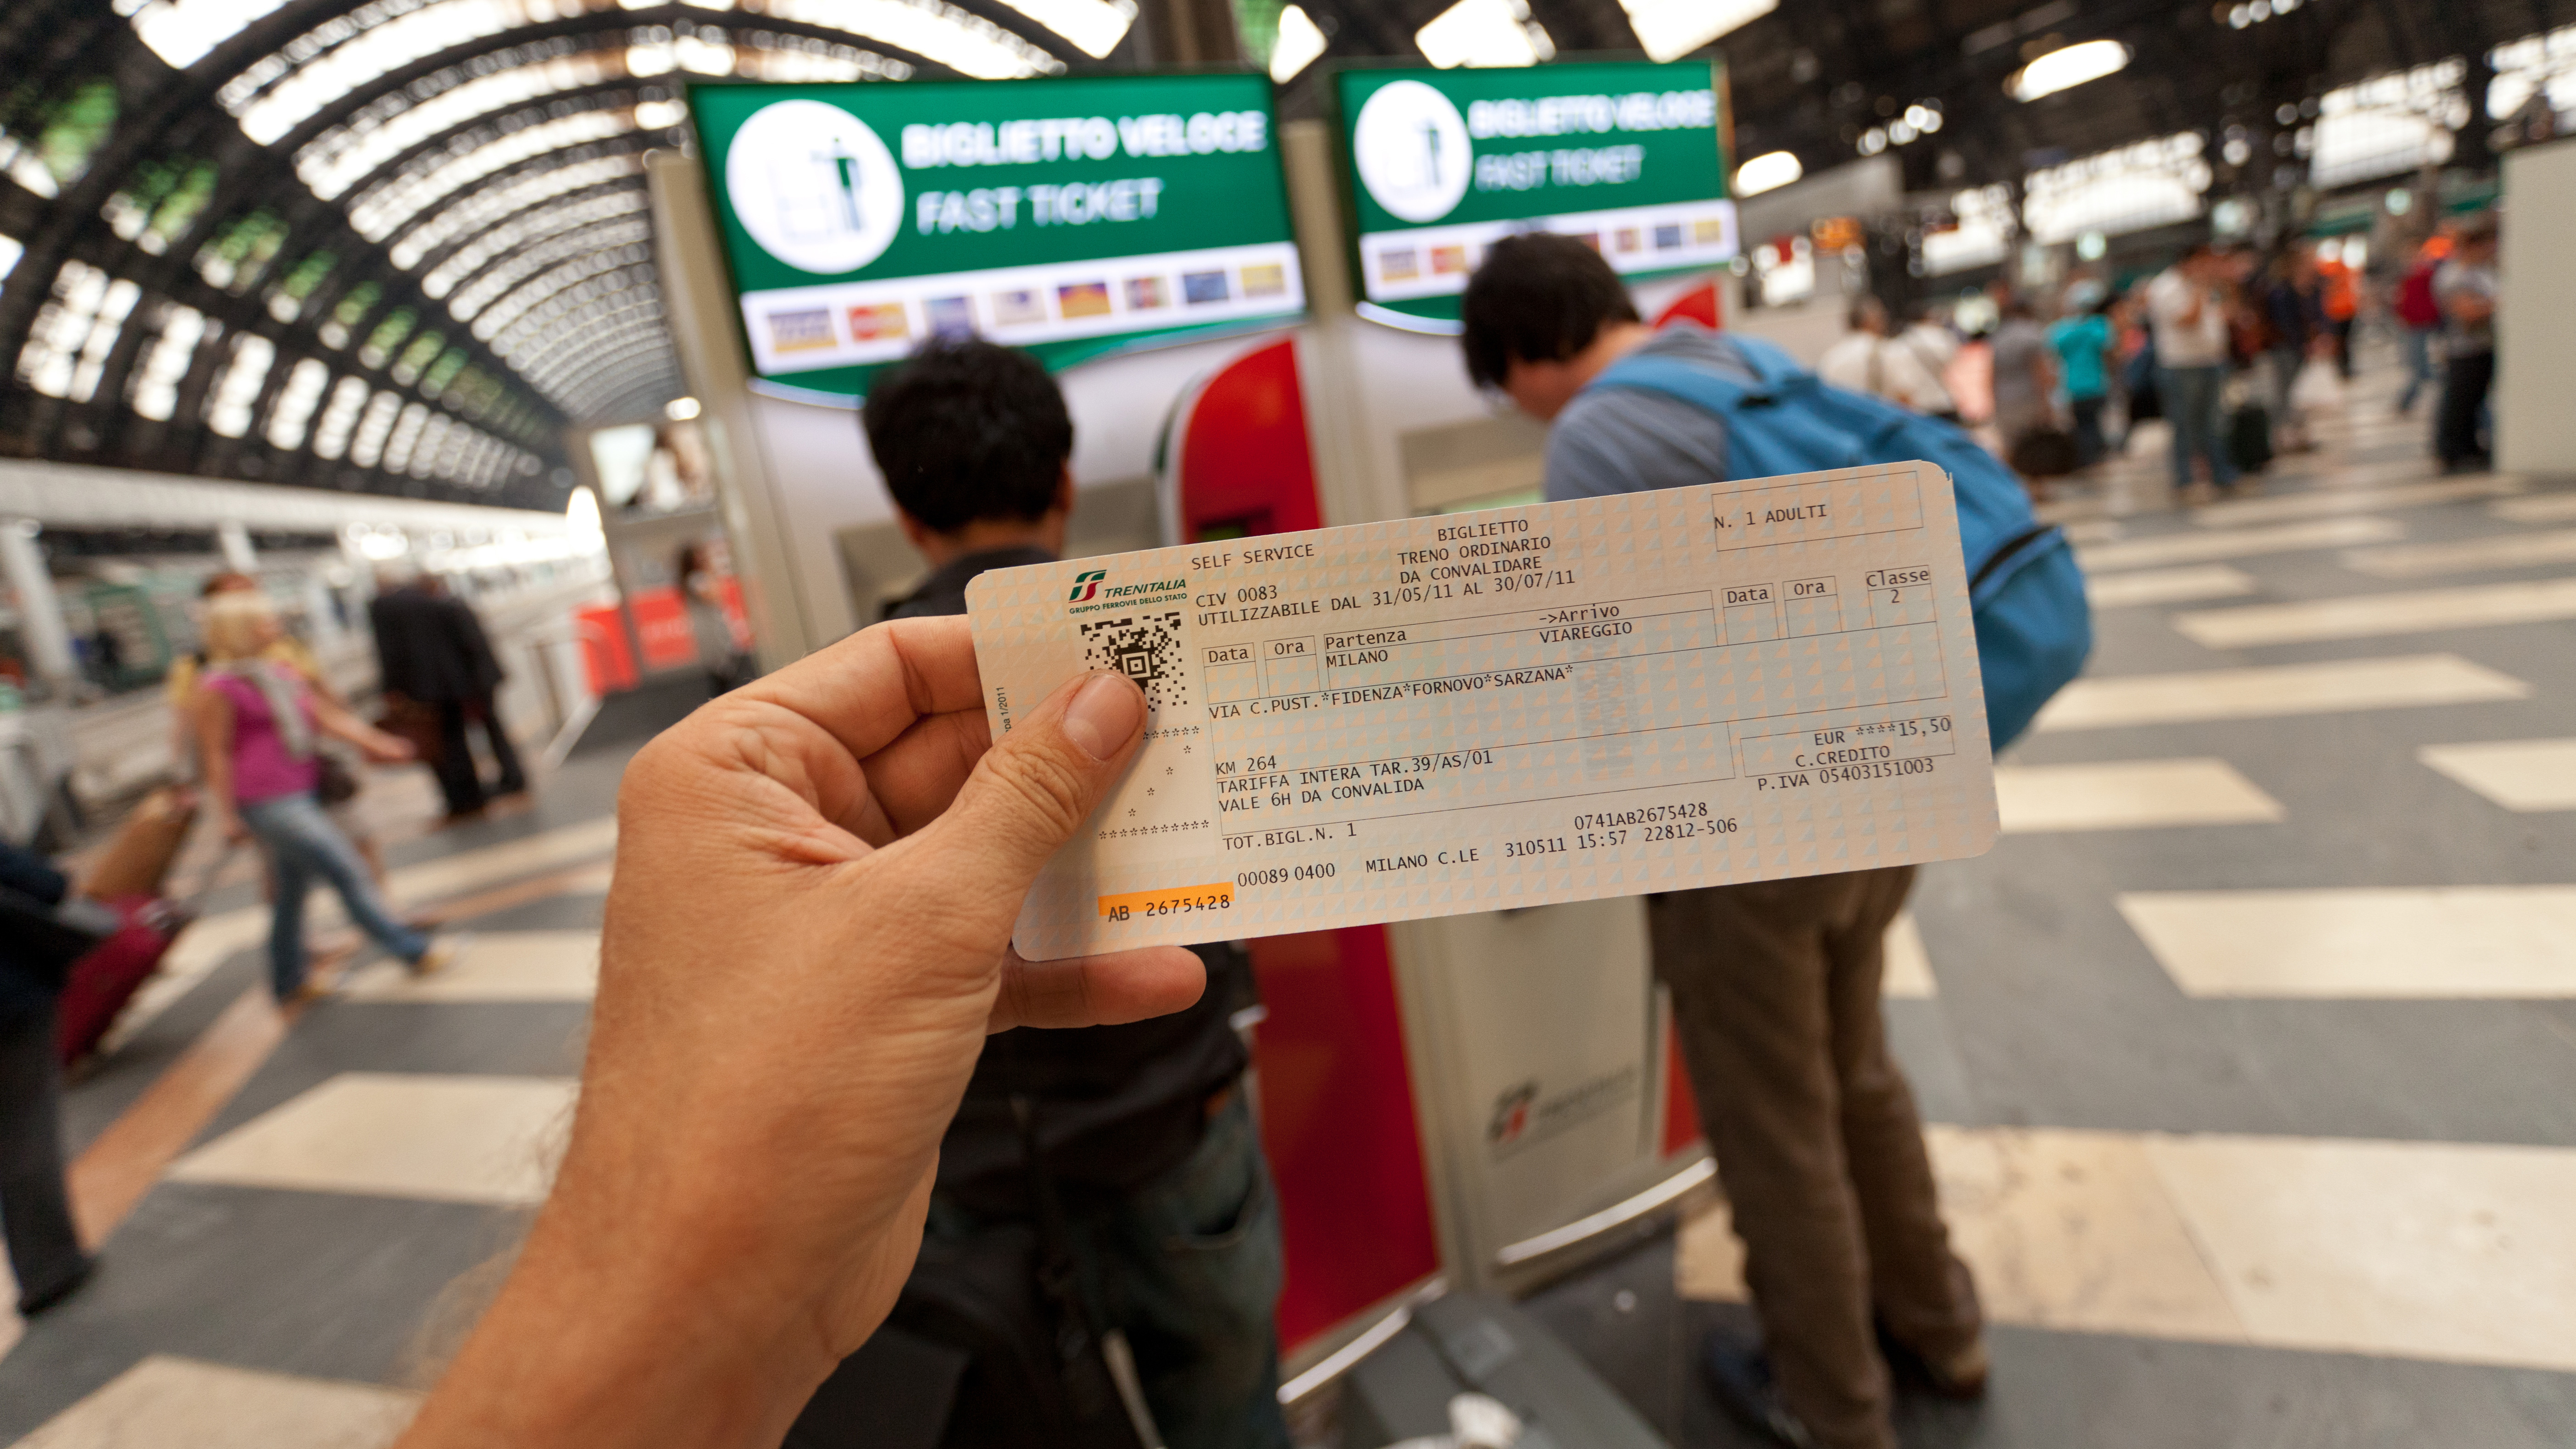 Top Ten Tips to Know Before Booking Tickets and Taking the Train